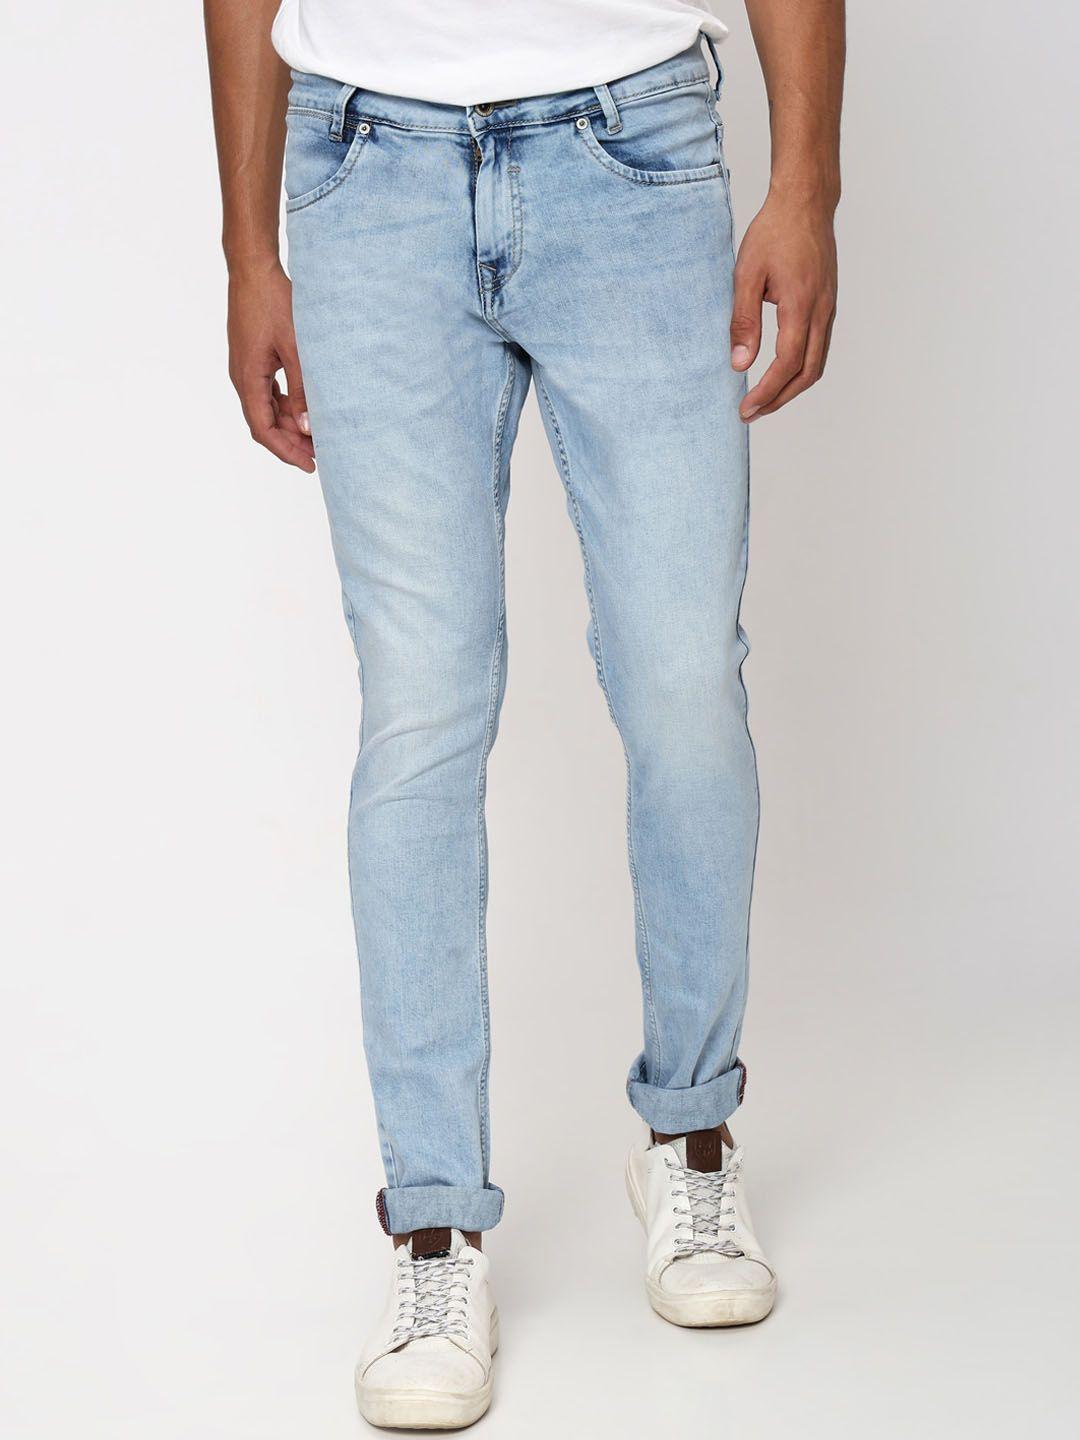 mufti-men-skinny-fit-low-distress-heavy-fade-stretchable-jeans